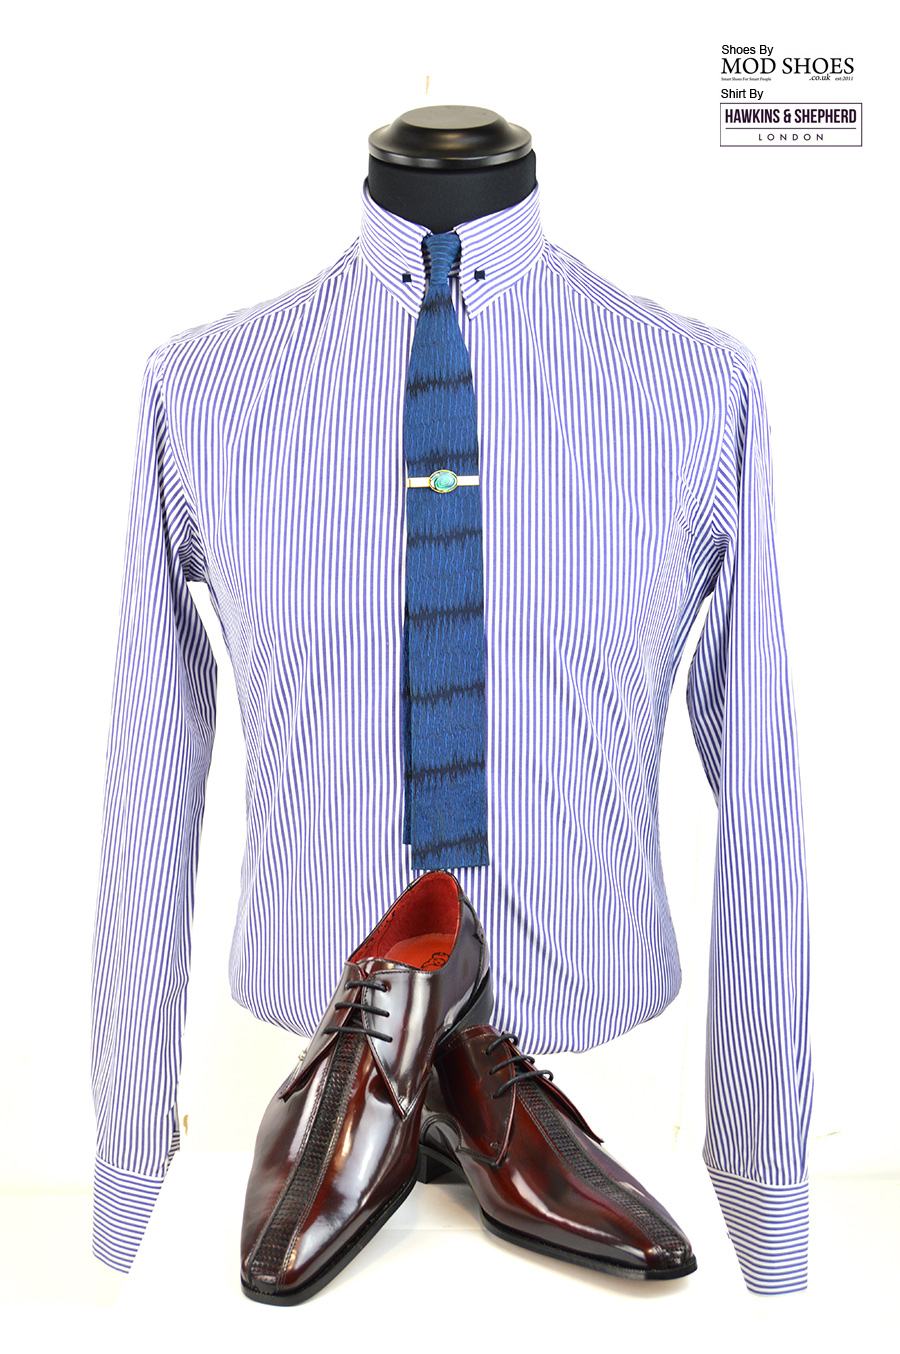 modshoes-stiped-shirt-form-hawkins-with-jeffery-west-shoes